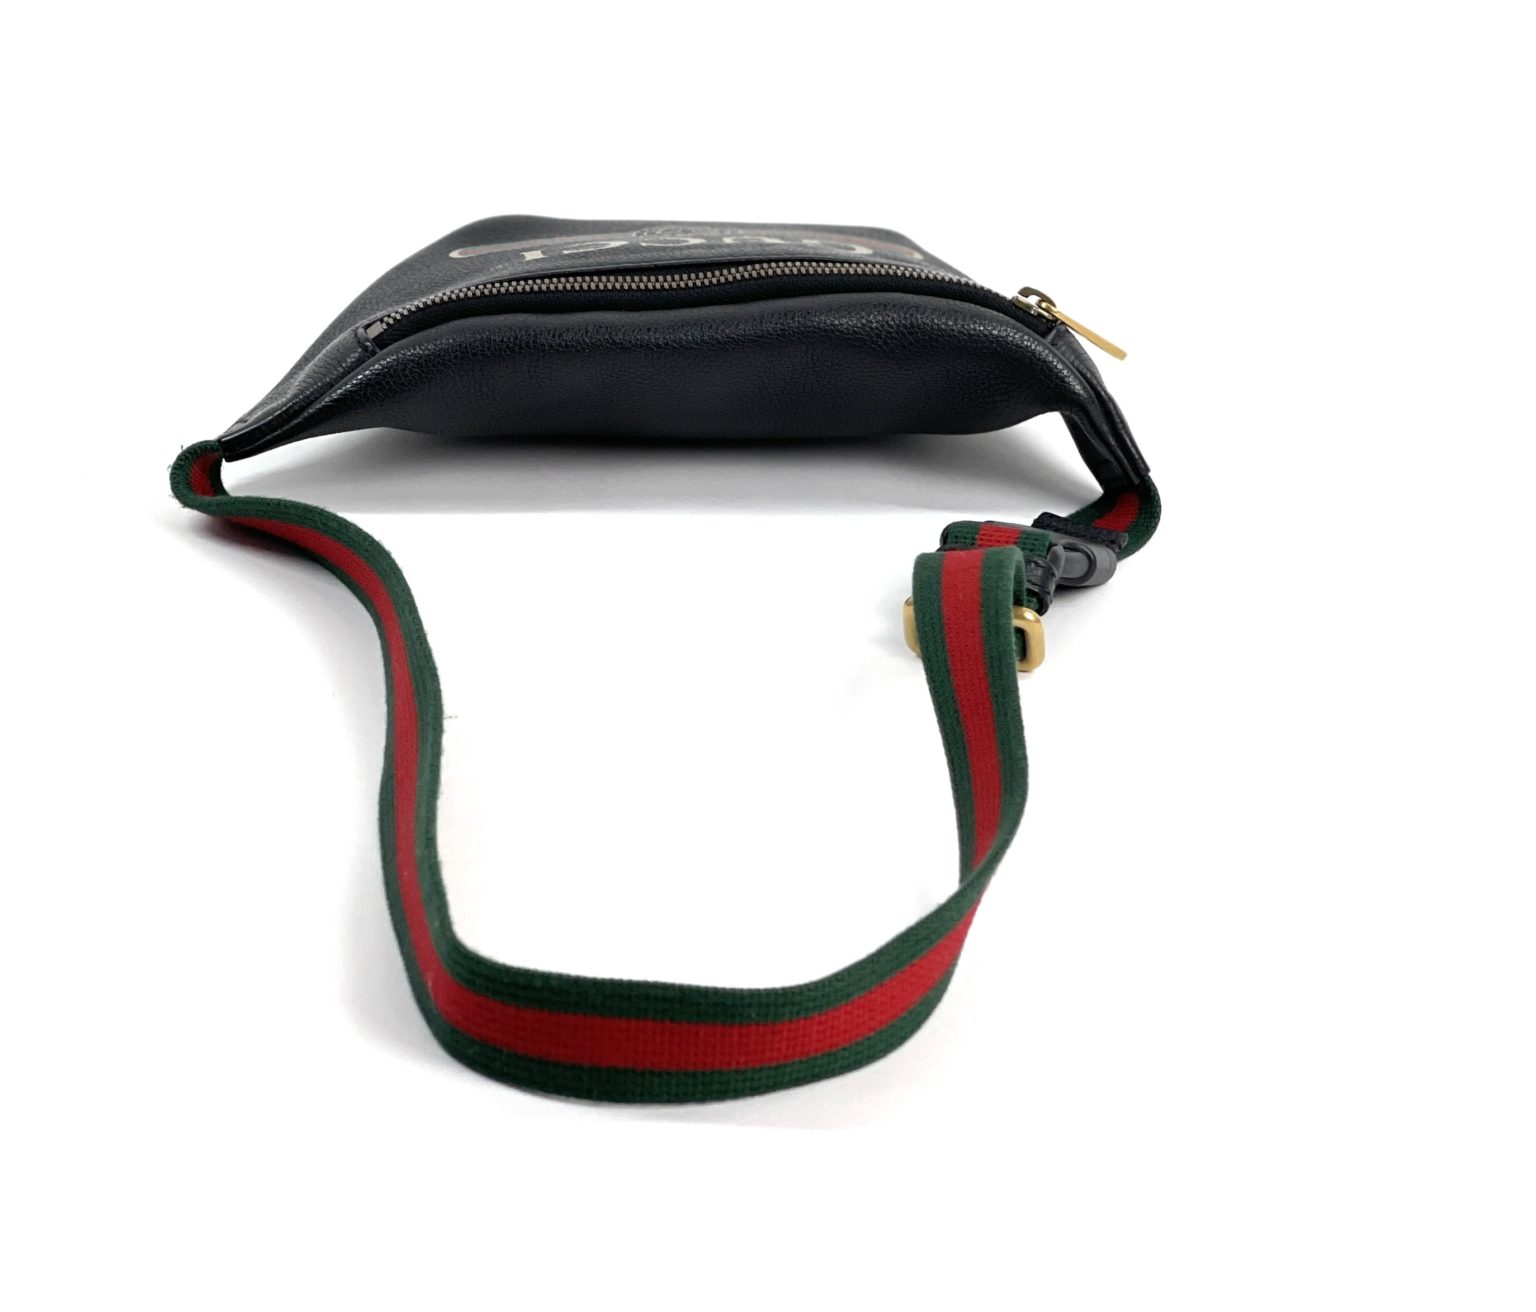 Gucci Pink Leather Small Bum Belt Bag - A World Of Goods For You, LLC